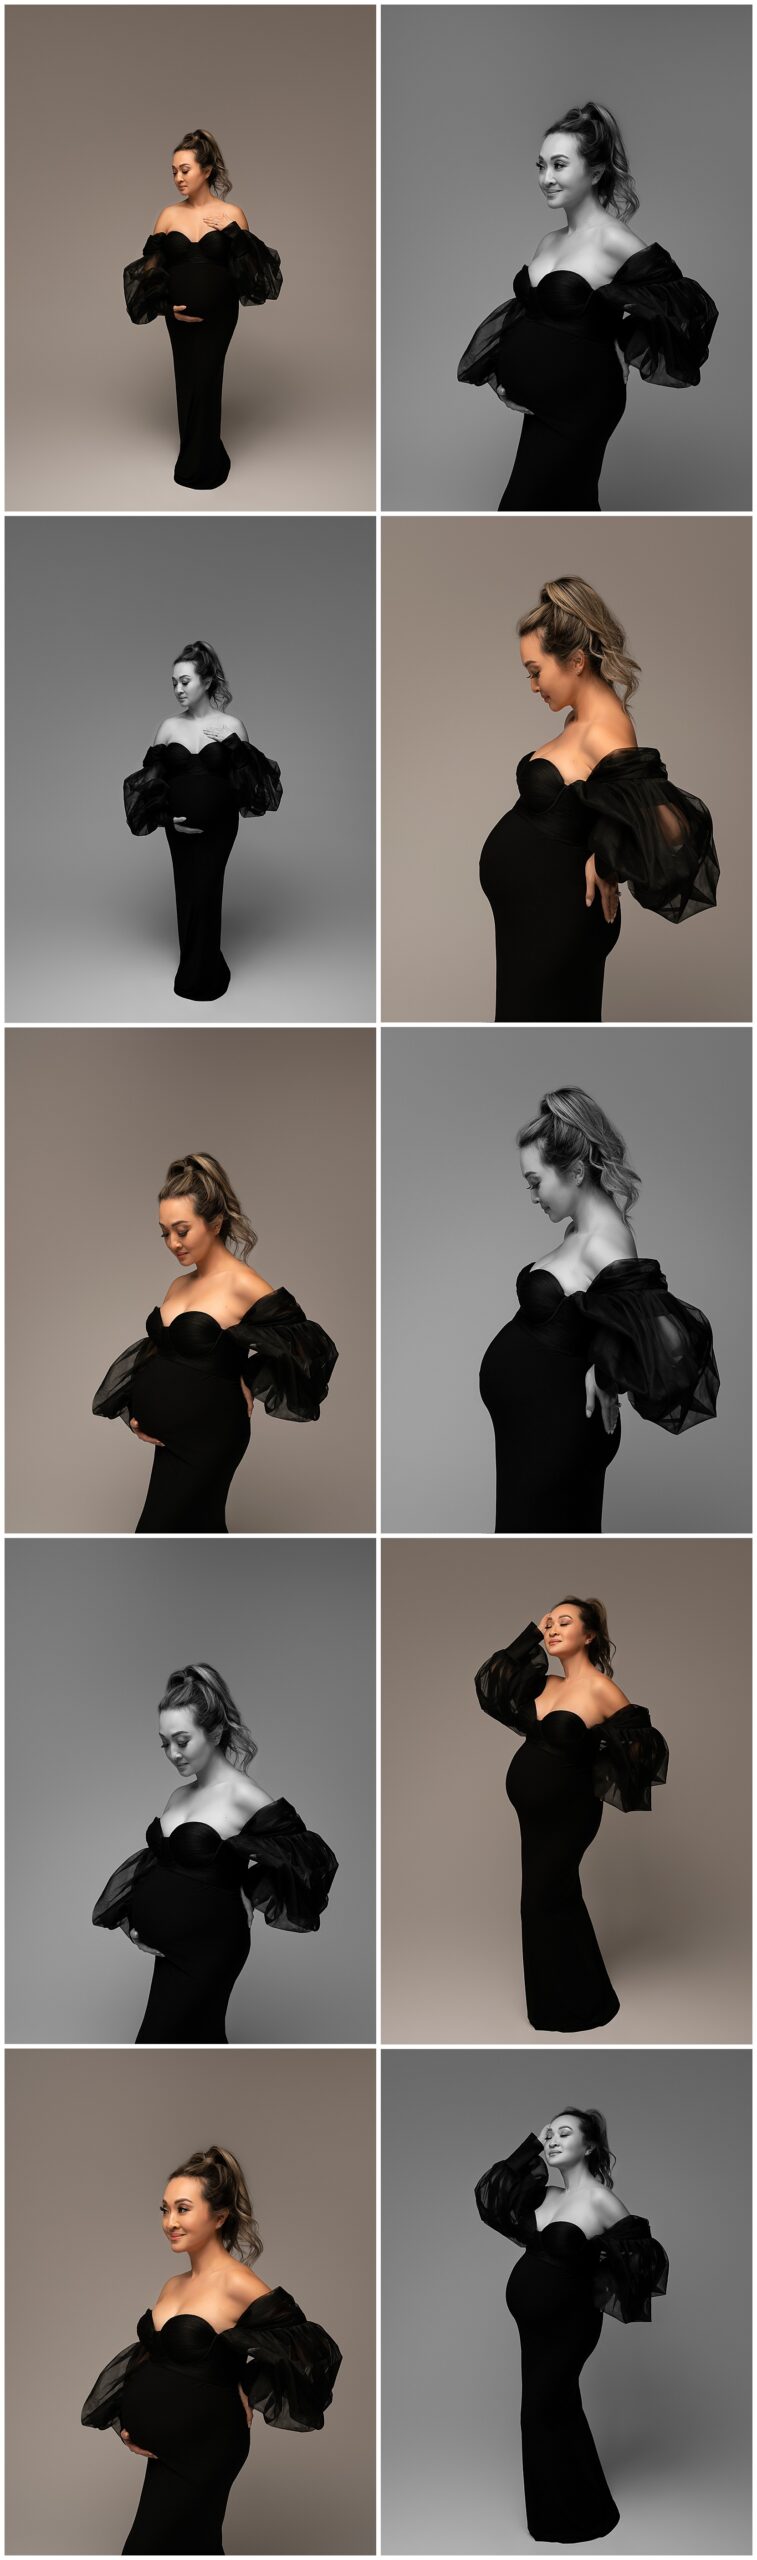 Series of 10 austin pregnancy photos featuring a pregnant woman in a black gown doing various maternity poses. Every other photo is black and white.